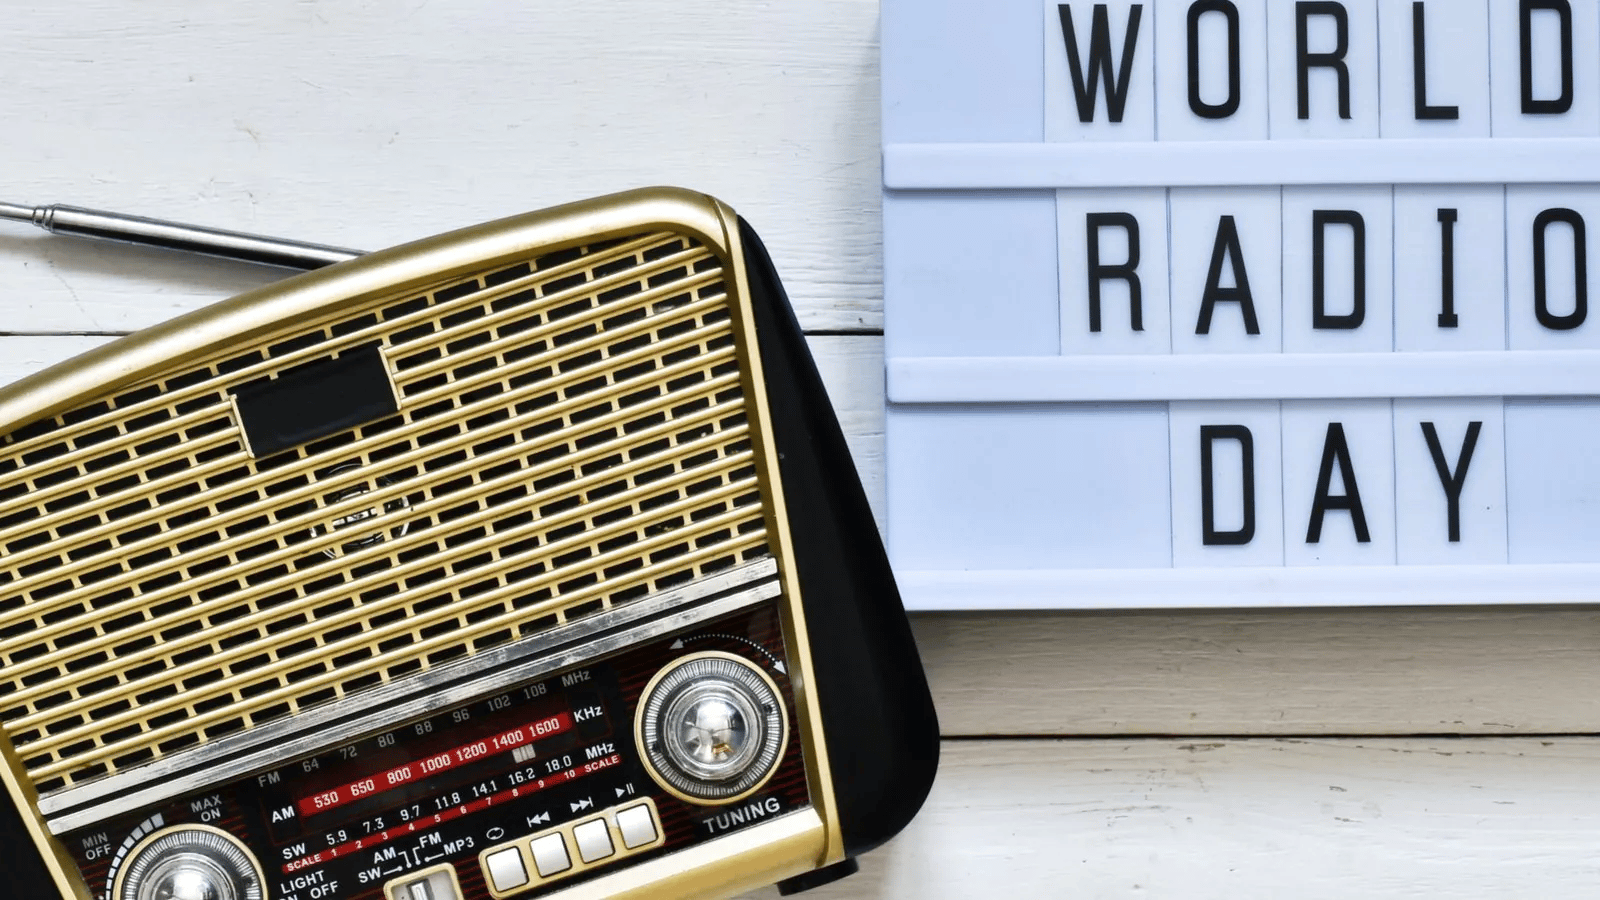 91 percent of U.S. adults listen to the radio at least once a week, far exceeding the reach of live and time-shifted TV at 76 percent, social media at 70 percent an online video at 67 percent.